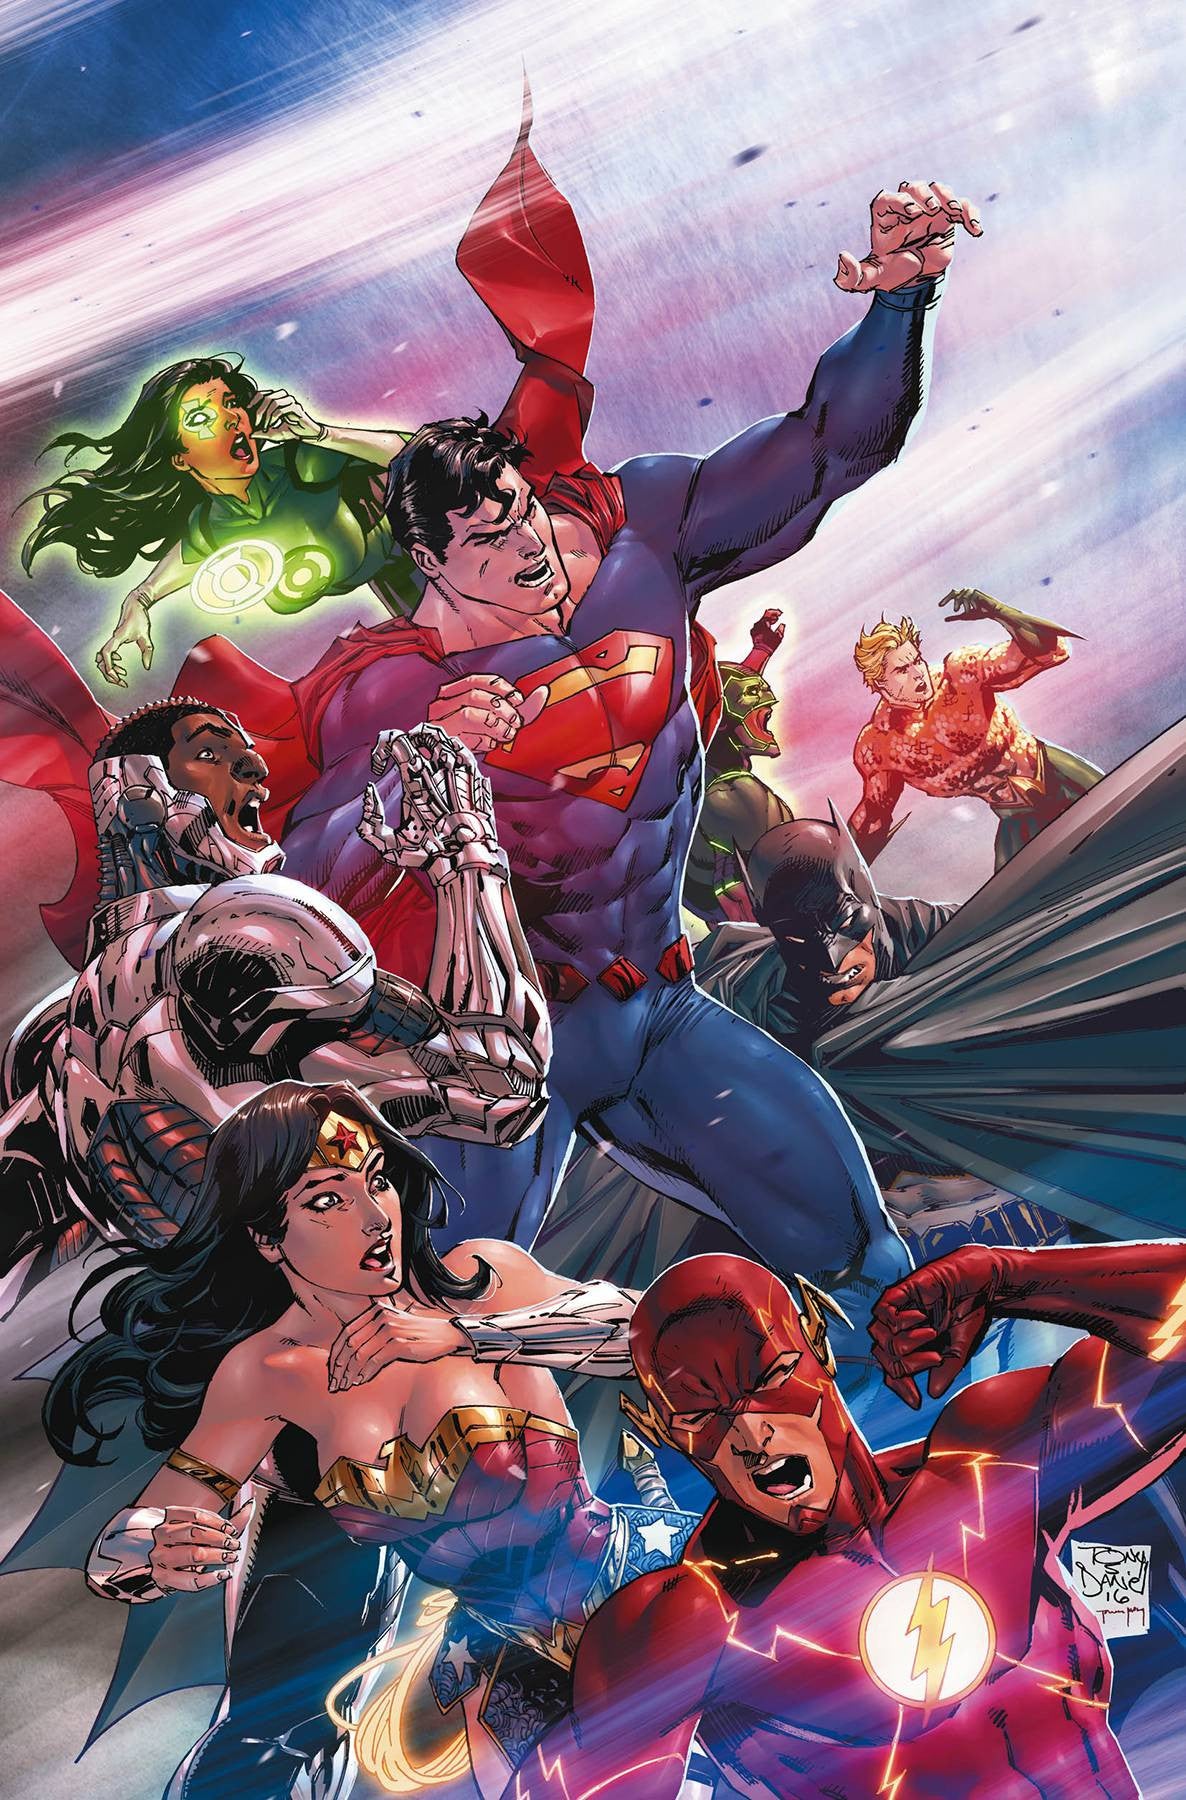 JUSTICE LEAGUE #6 COVER